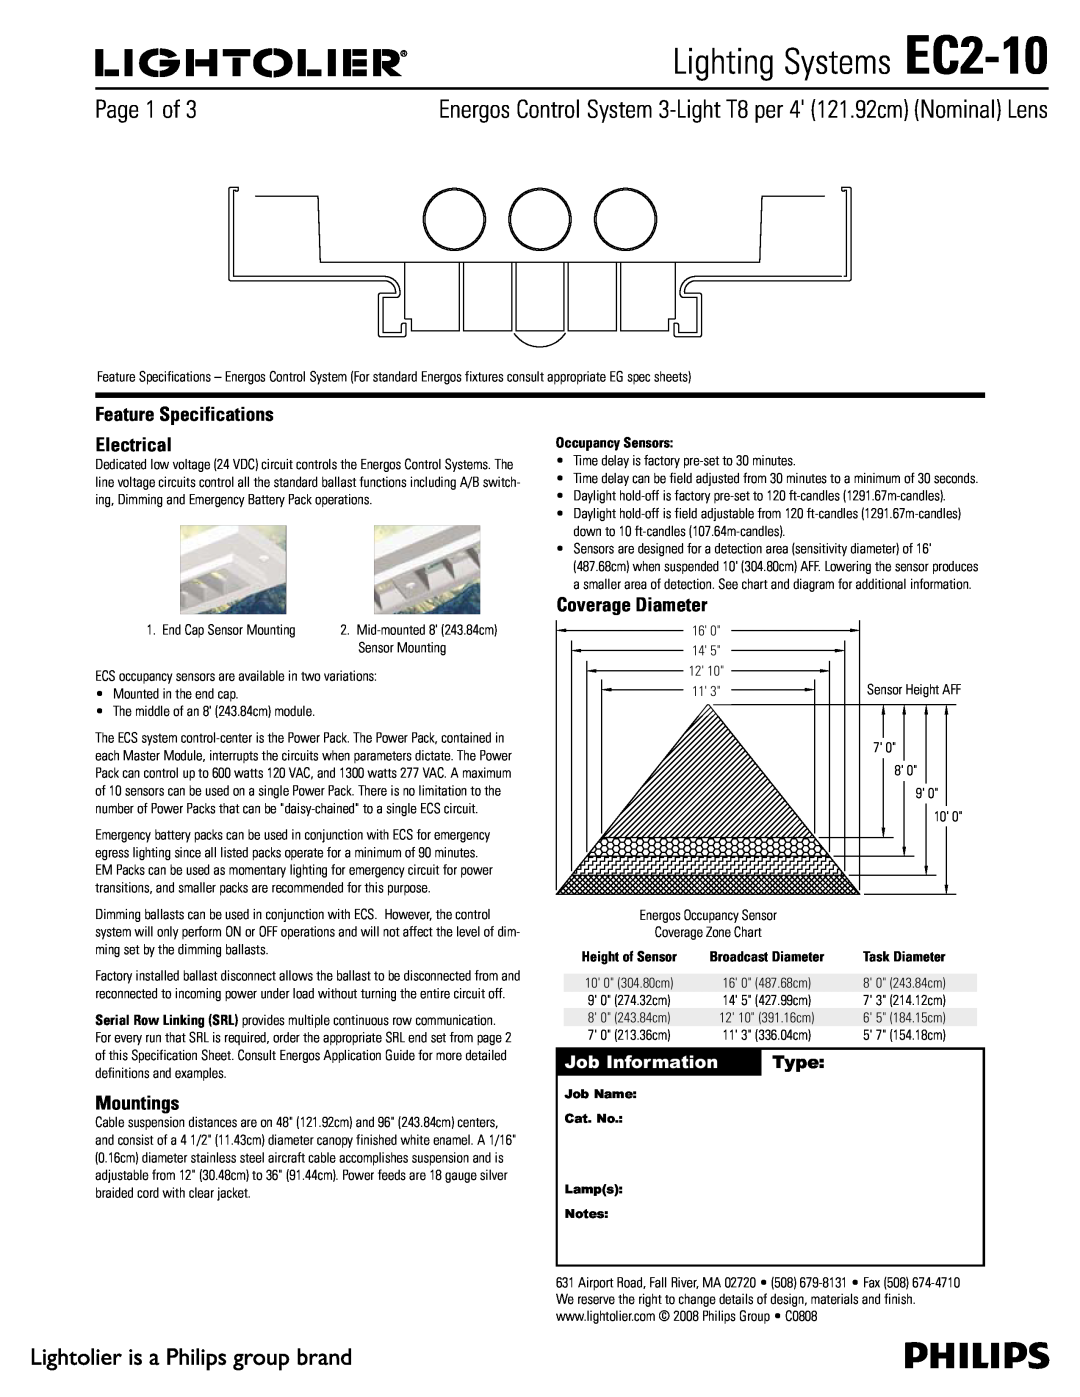 Lightolier specifications Lighting Systems EC2-10, Feature Specifications Electrical, Mountings, Coverage Diameter 